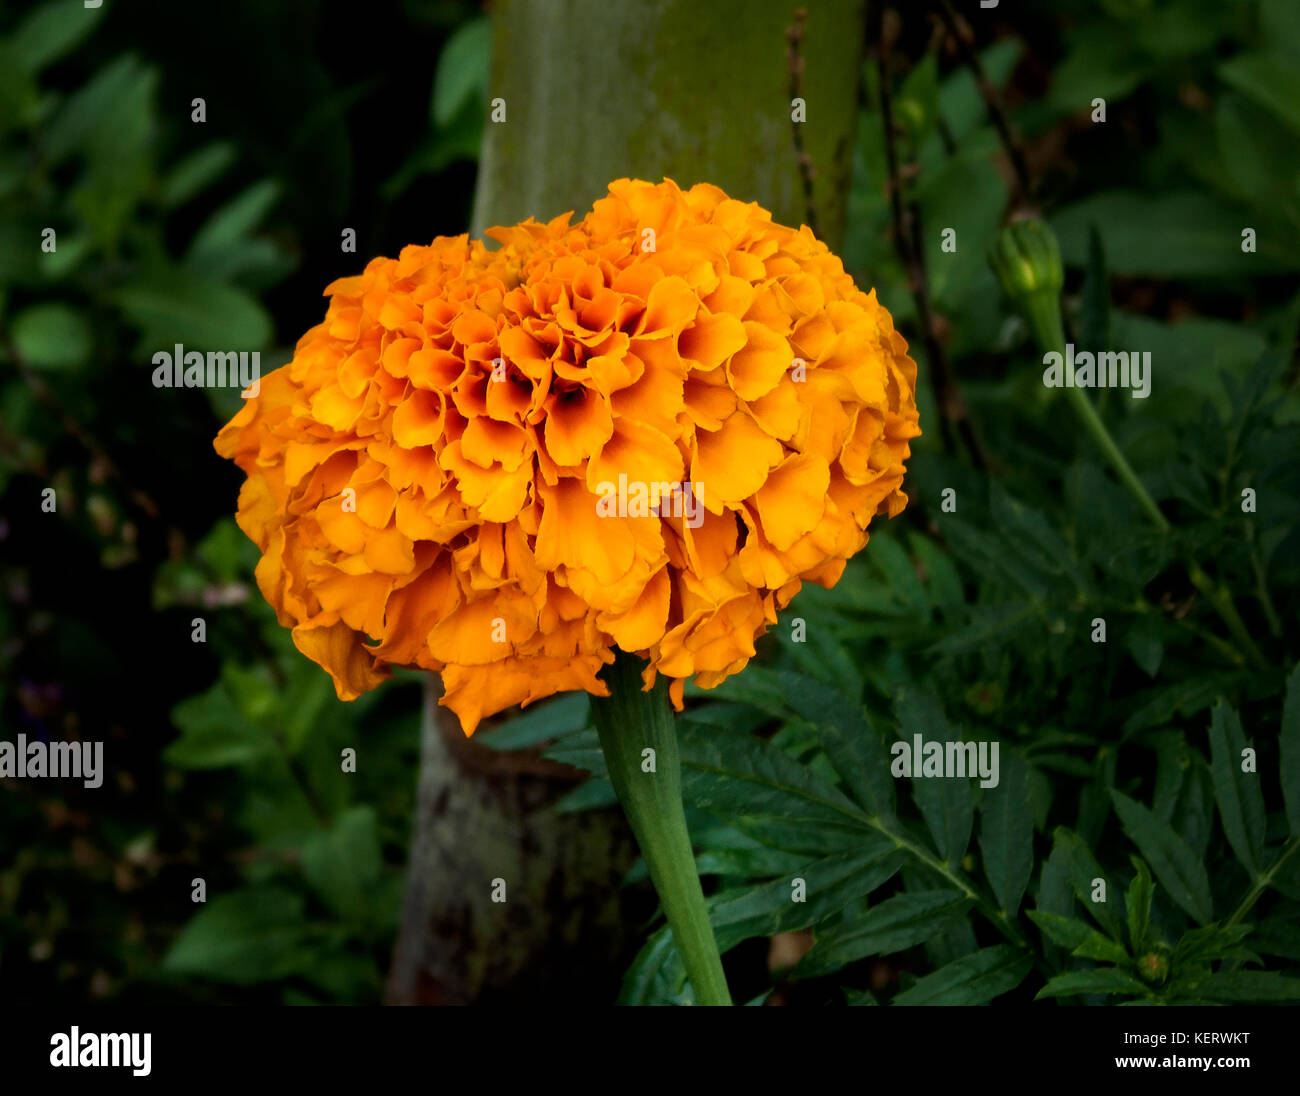 Close-Up of Marigold Flower in Park Stock Photo